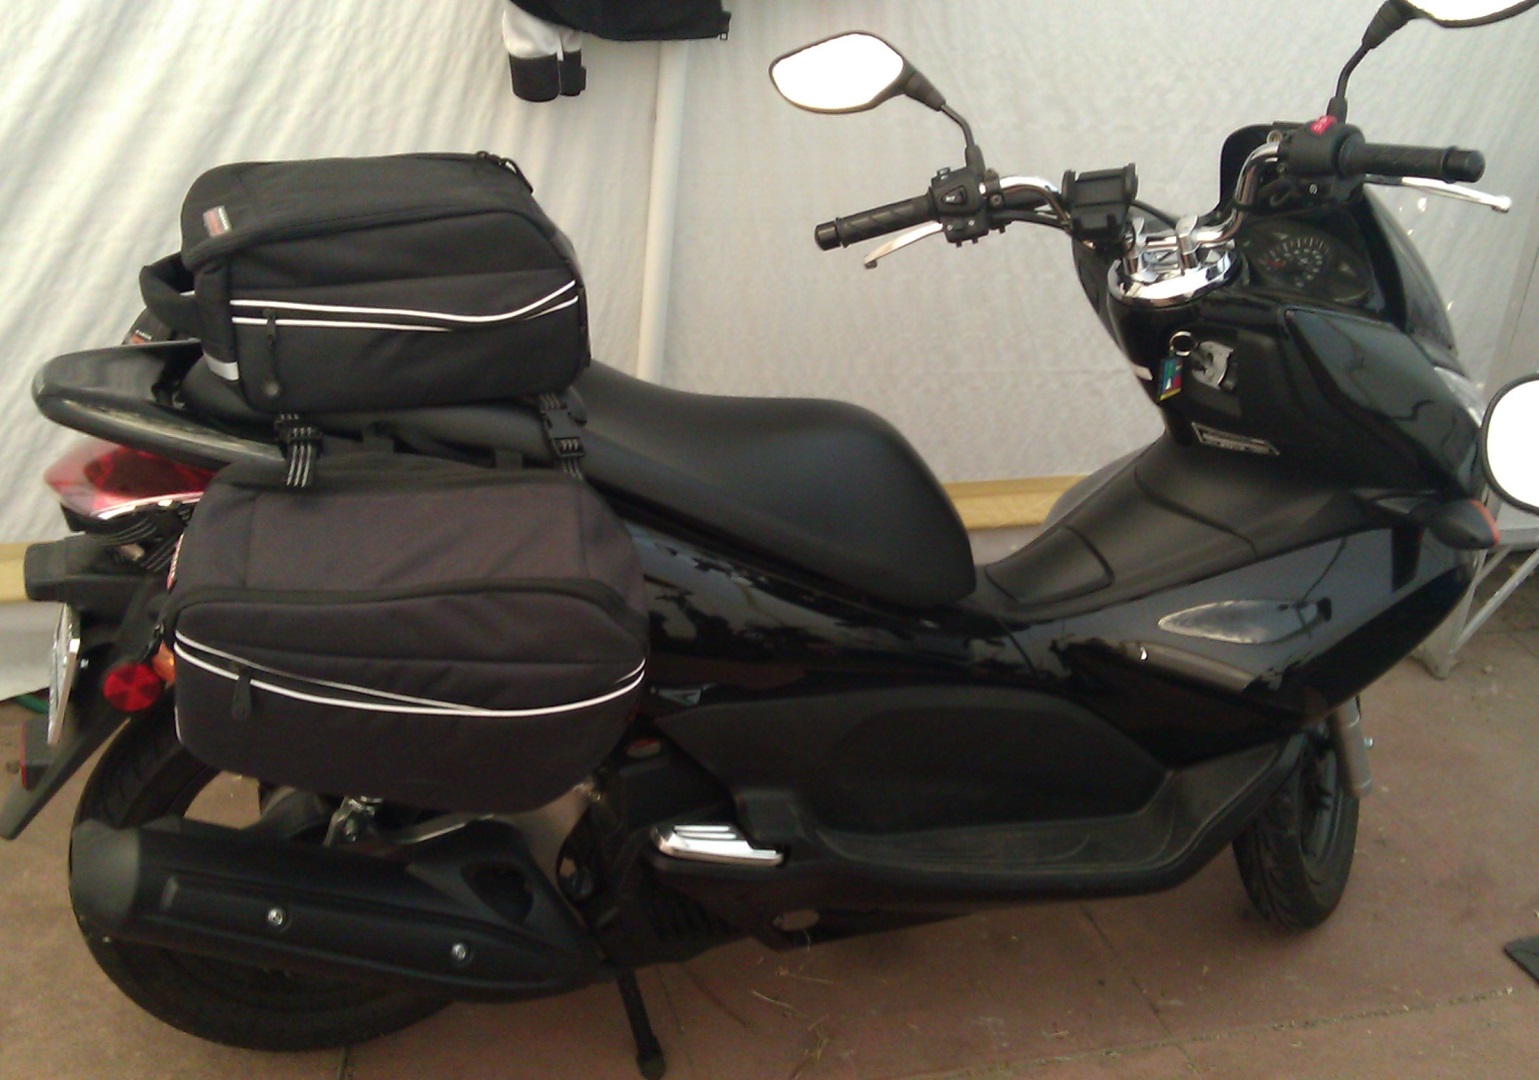 The passenger seat also provides a nice backrest. I've usually got a pair of sandals or other &quot;comfy&quot; shoes stashed in there.<br /><br />I'm considering getting another topper and figuring a way to use it as a tank bag. The GIVI bag is so hard to find and costs more, by itself, than this entire setup.